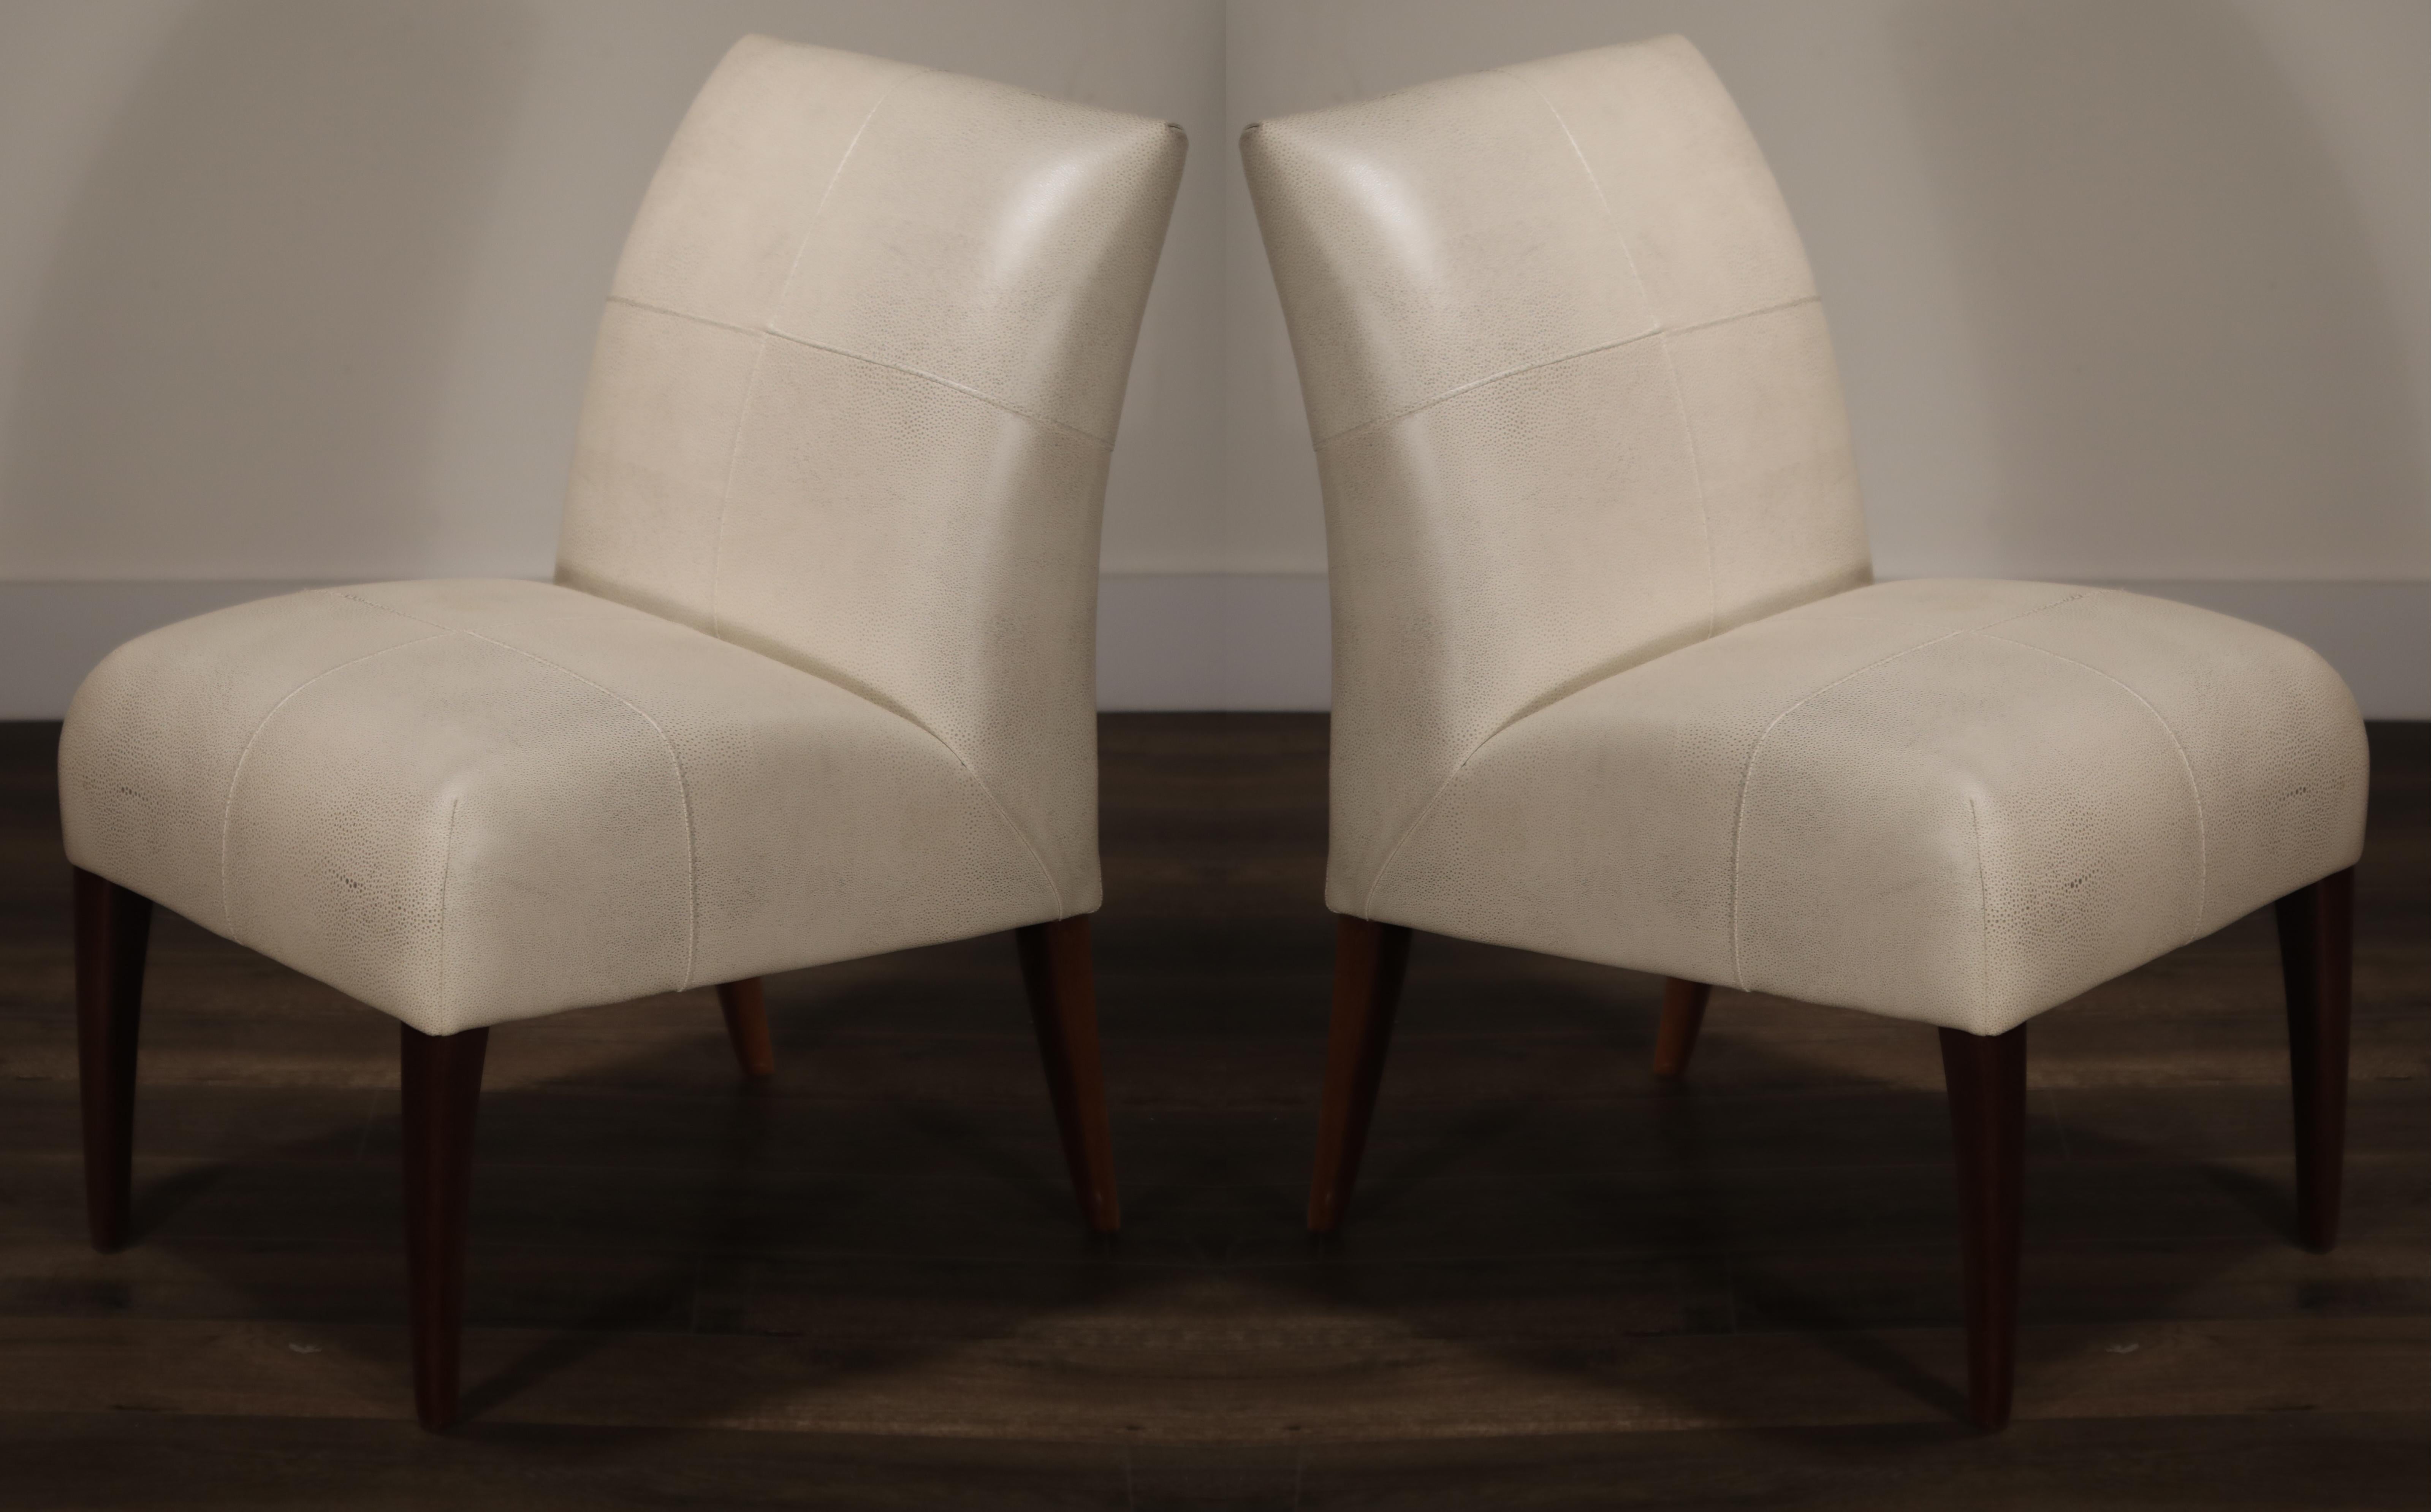 An opulent and incredibly stylish pair of Fendi side chairs, covered in high-quality white shagreen leather with flecks of gold tone. The incredible shagreen leather resembles shark and stingray skin with its tiny hills and valleys. The Fendi brand